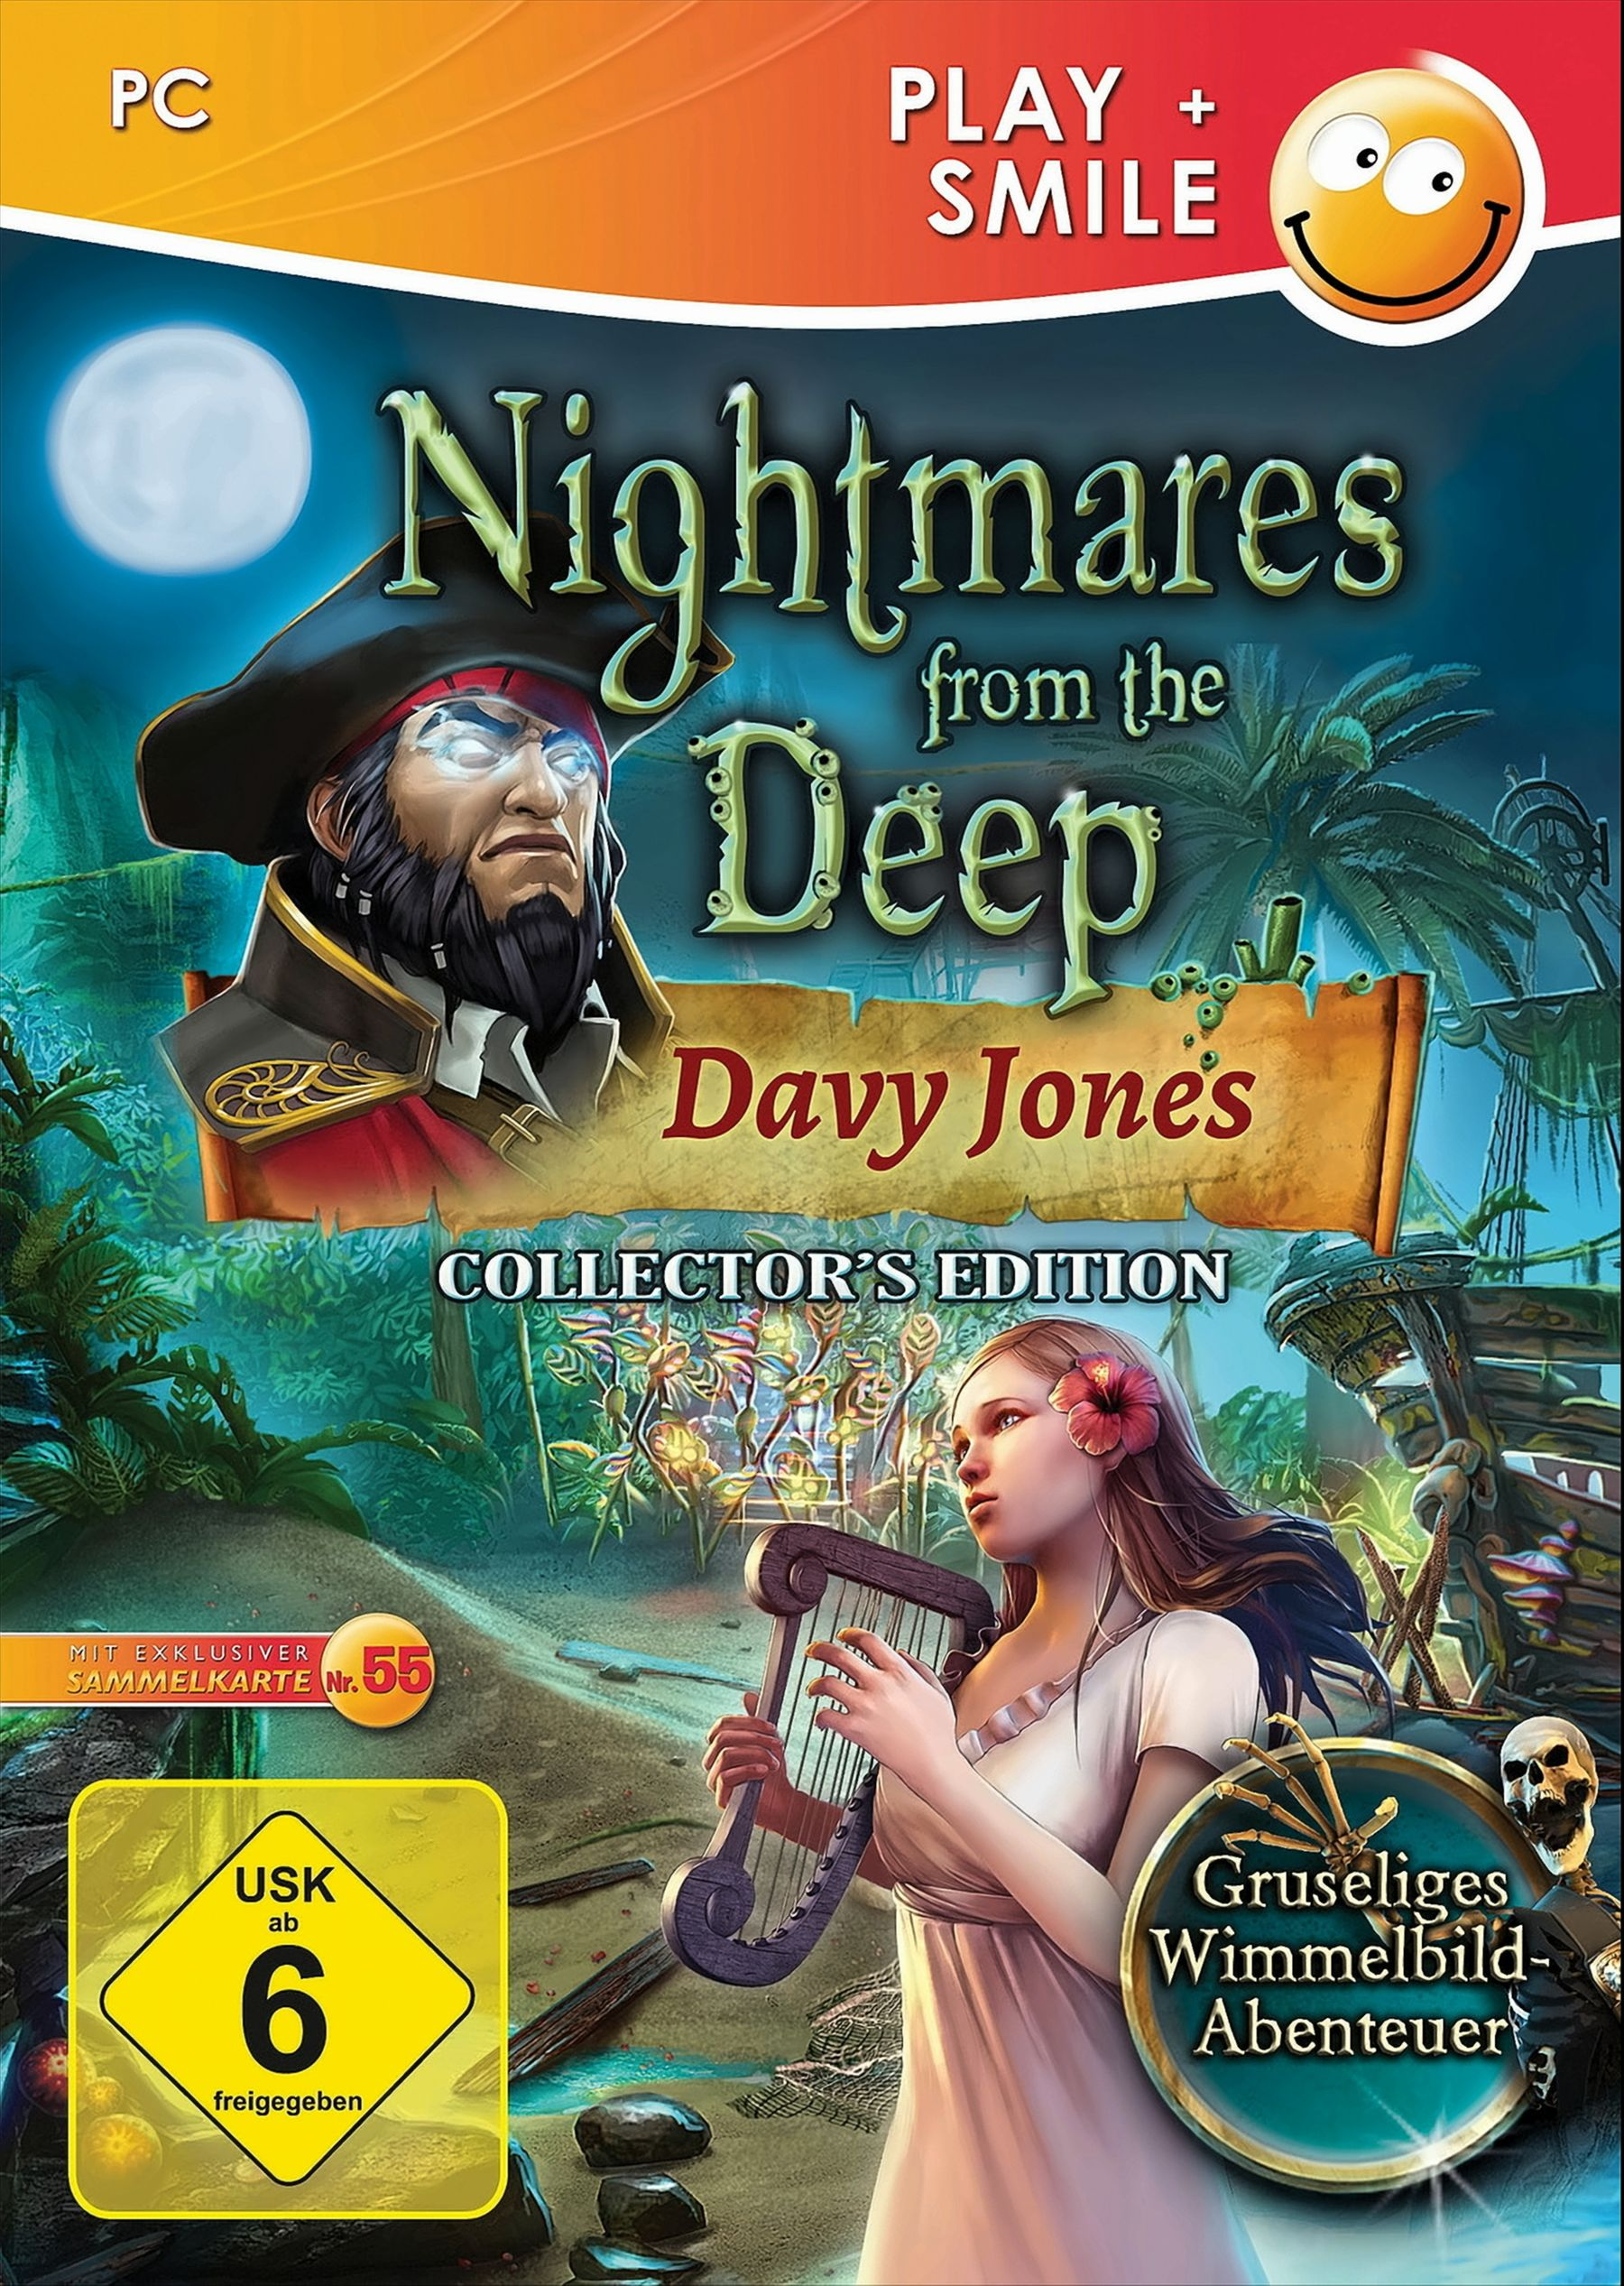 Nightmares From The Edition Deep: Jones Collector\'s [PC] - Davy 